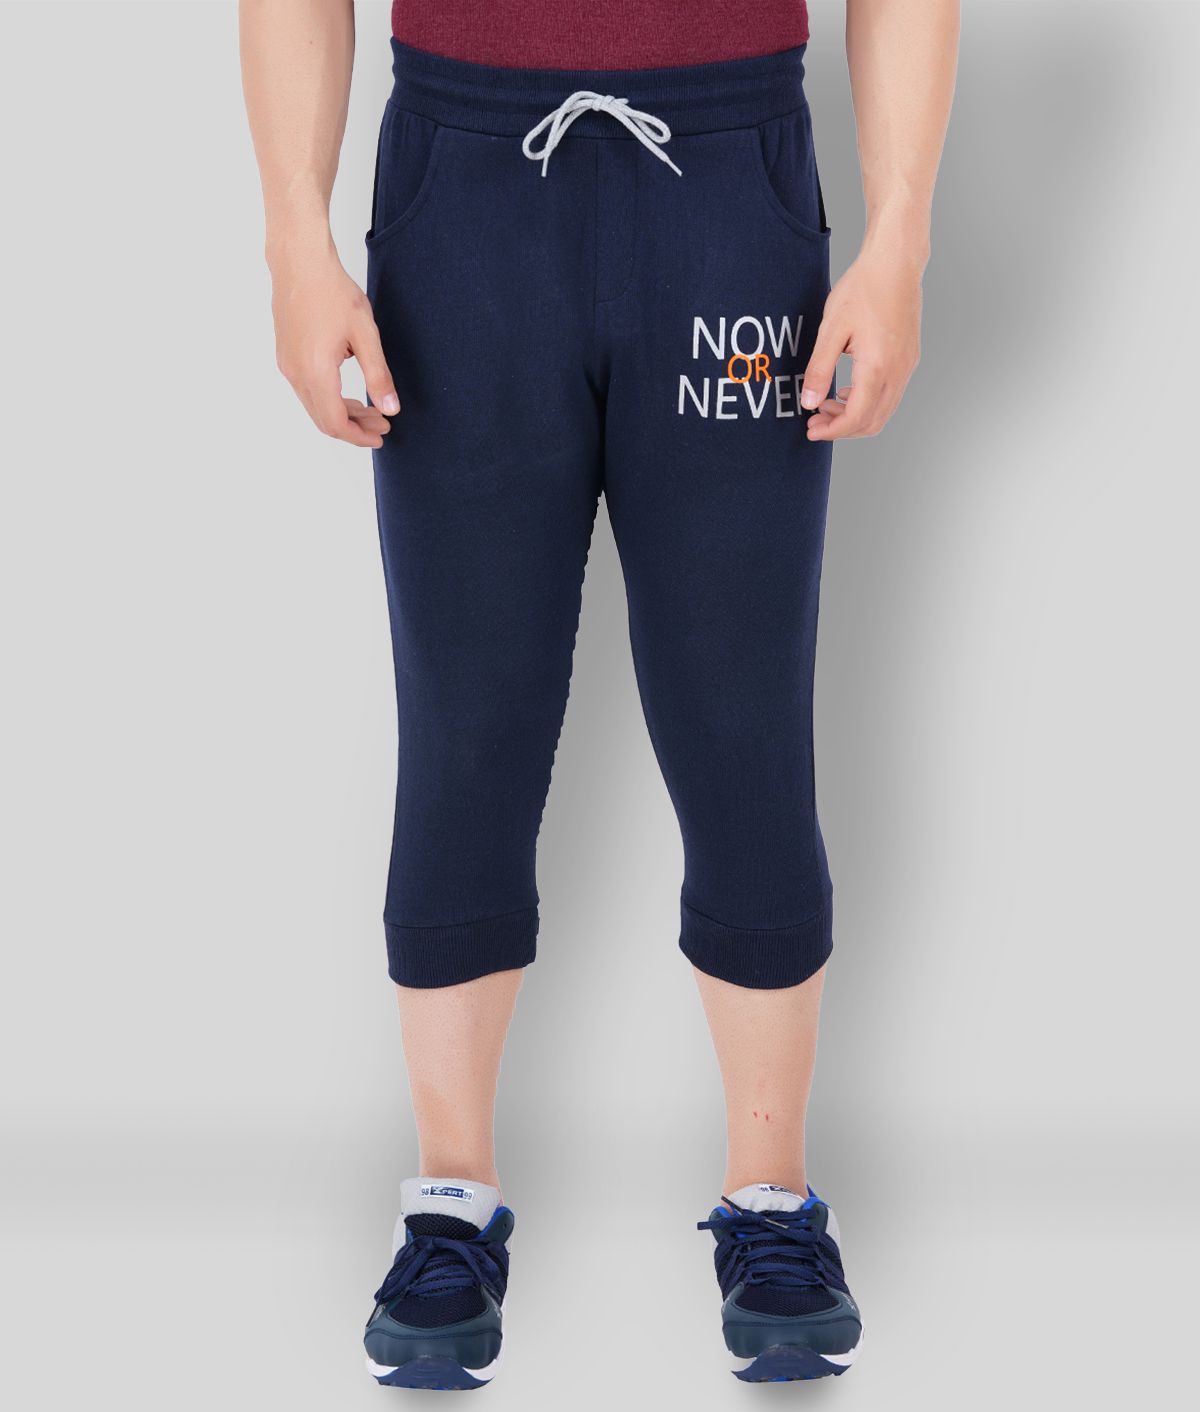     			NOW OR NEVER - Navy Cotton Blend Men's Three-Fourths ( Pack of 1 )